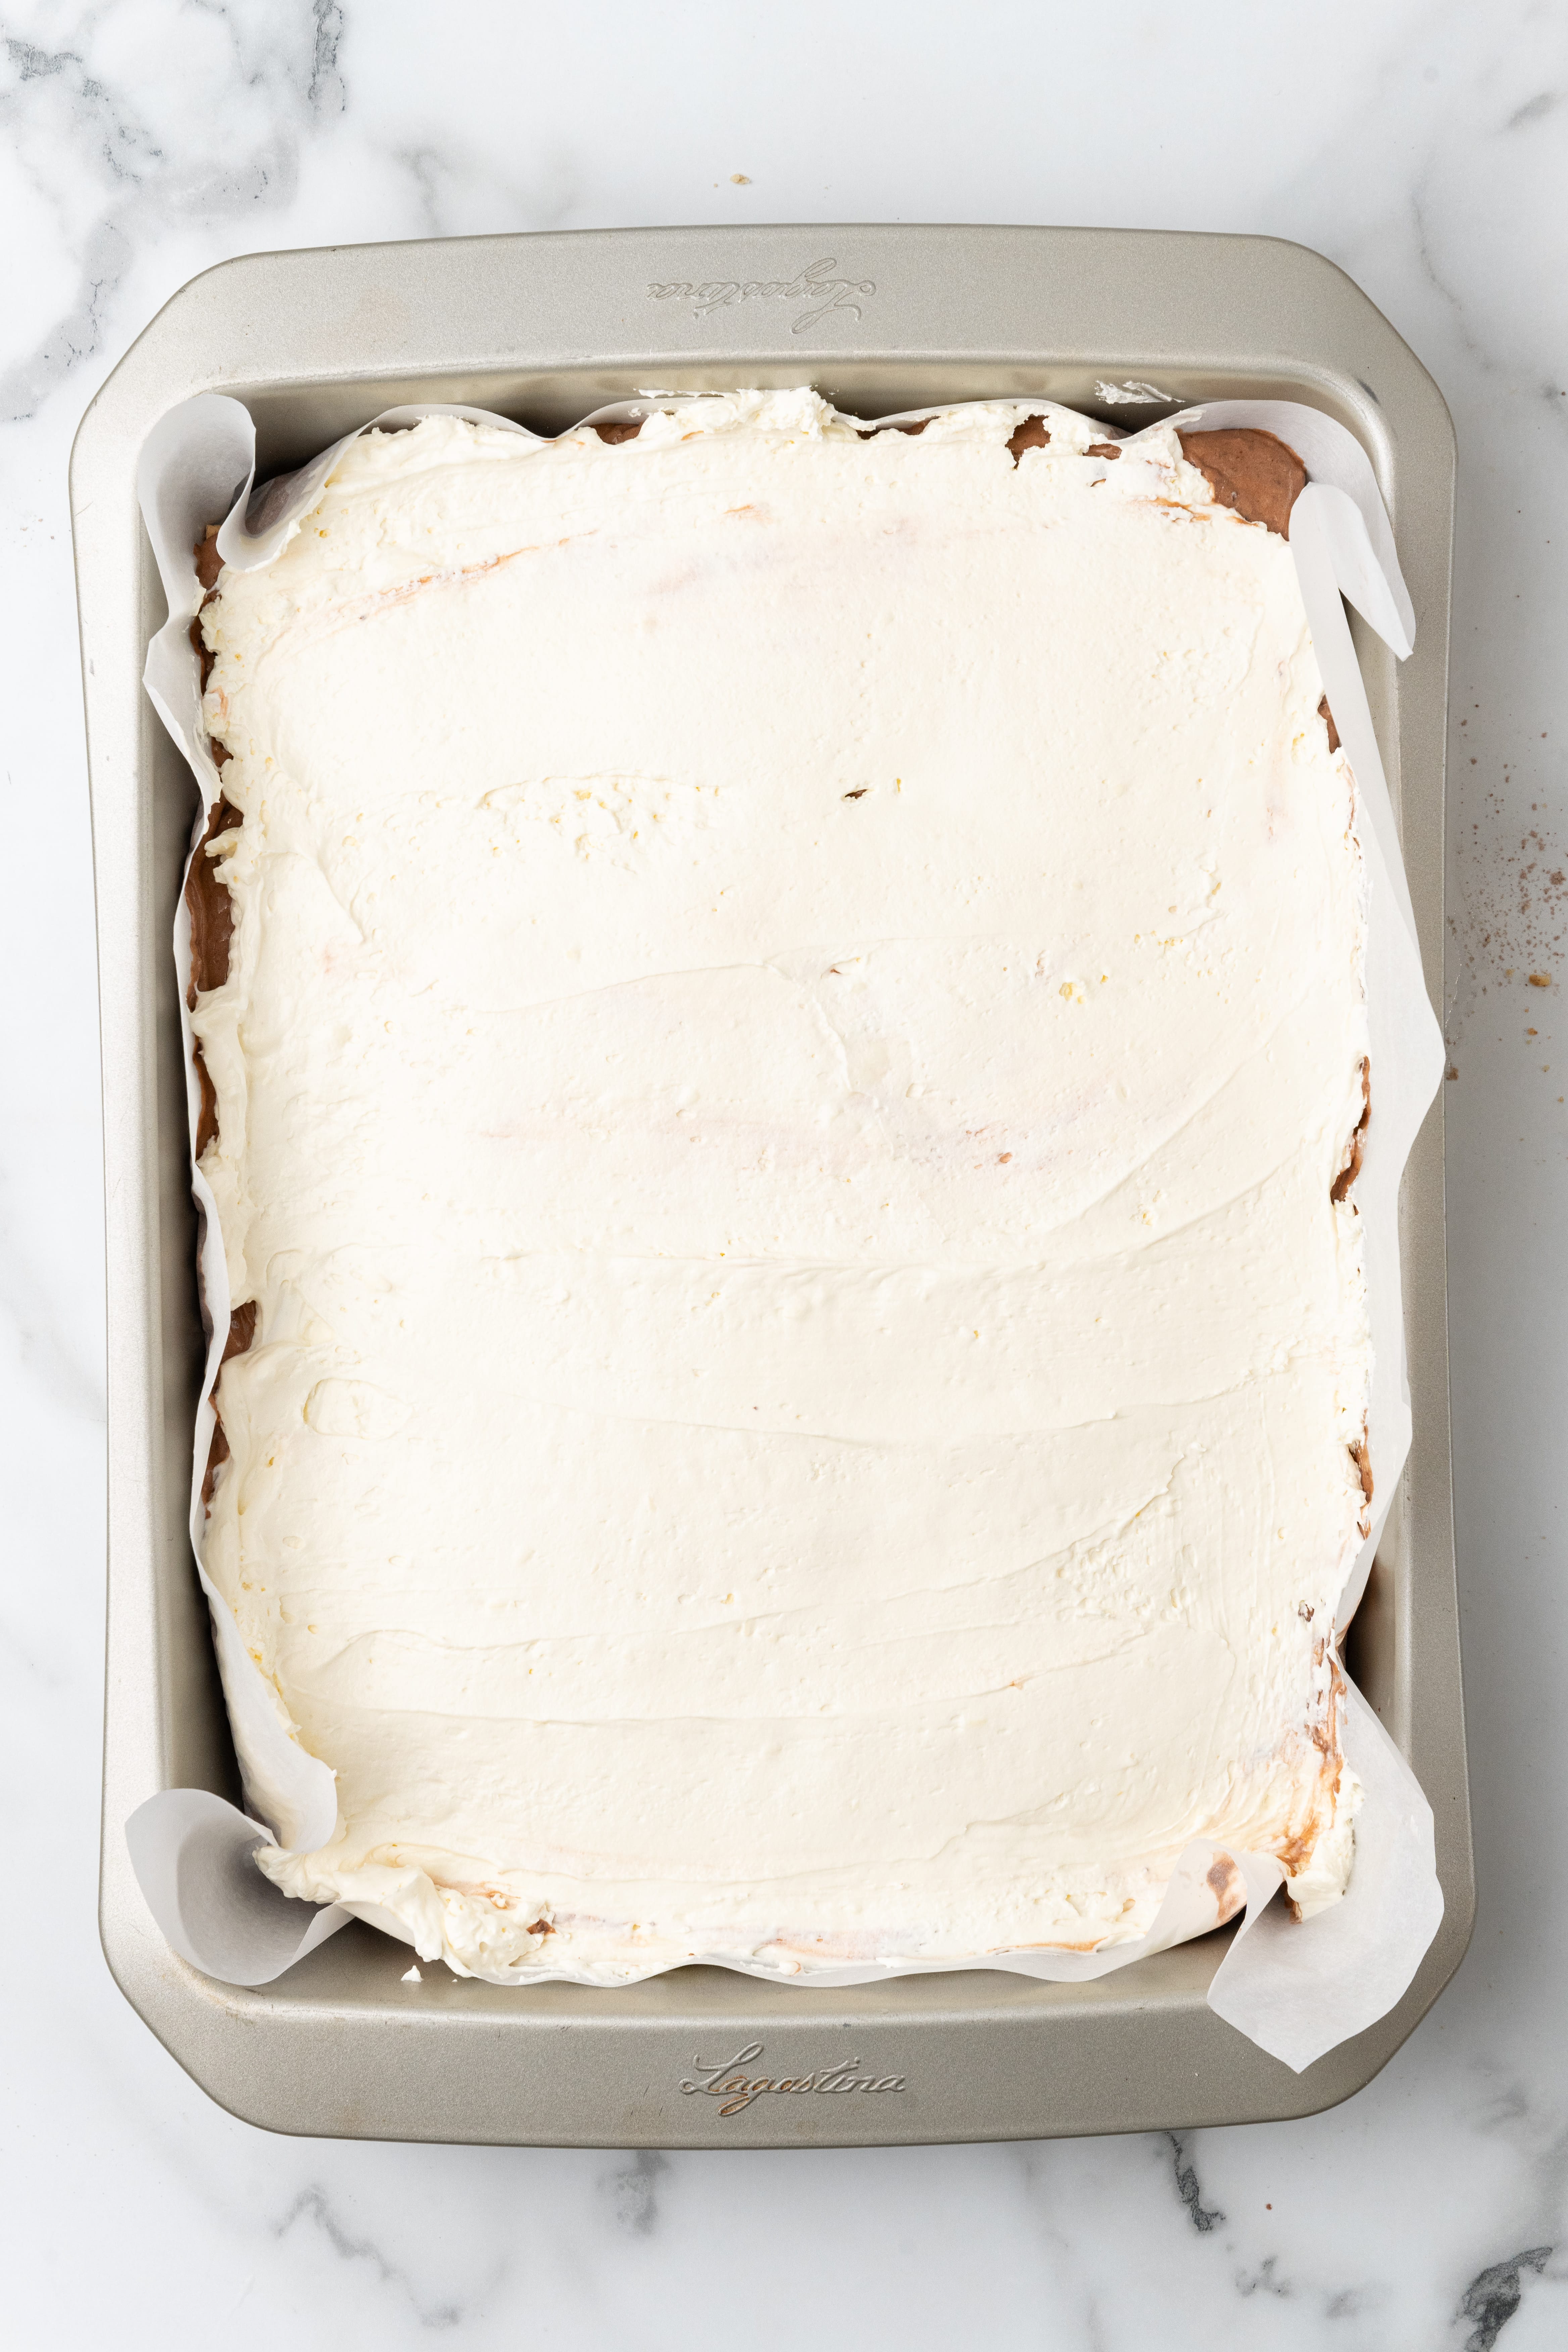 marshmallow fluff spread over chocolate pudding and graham cracker squares in a parchment paper lined baking pan